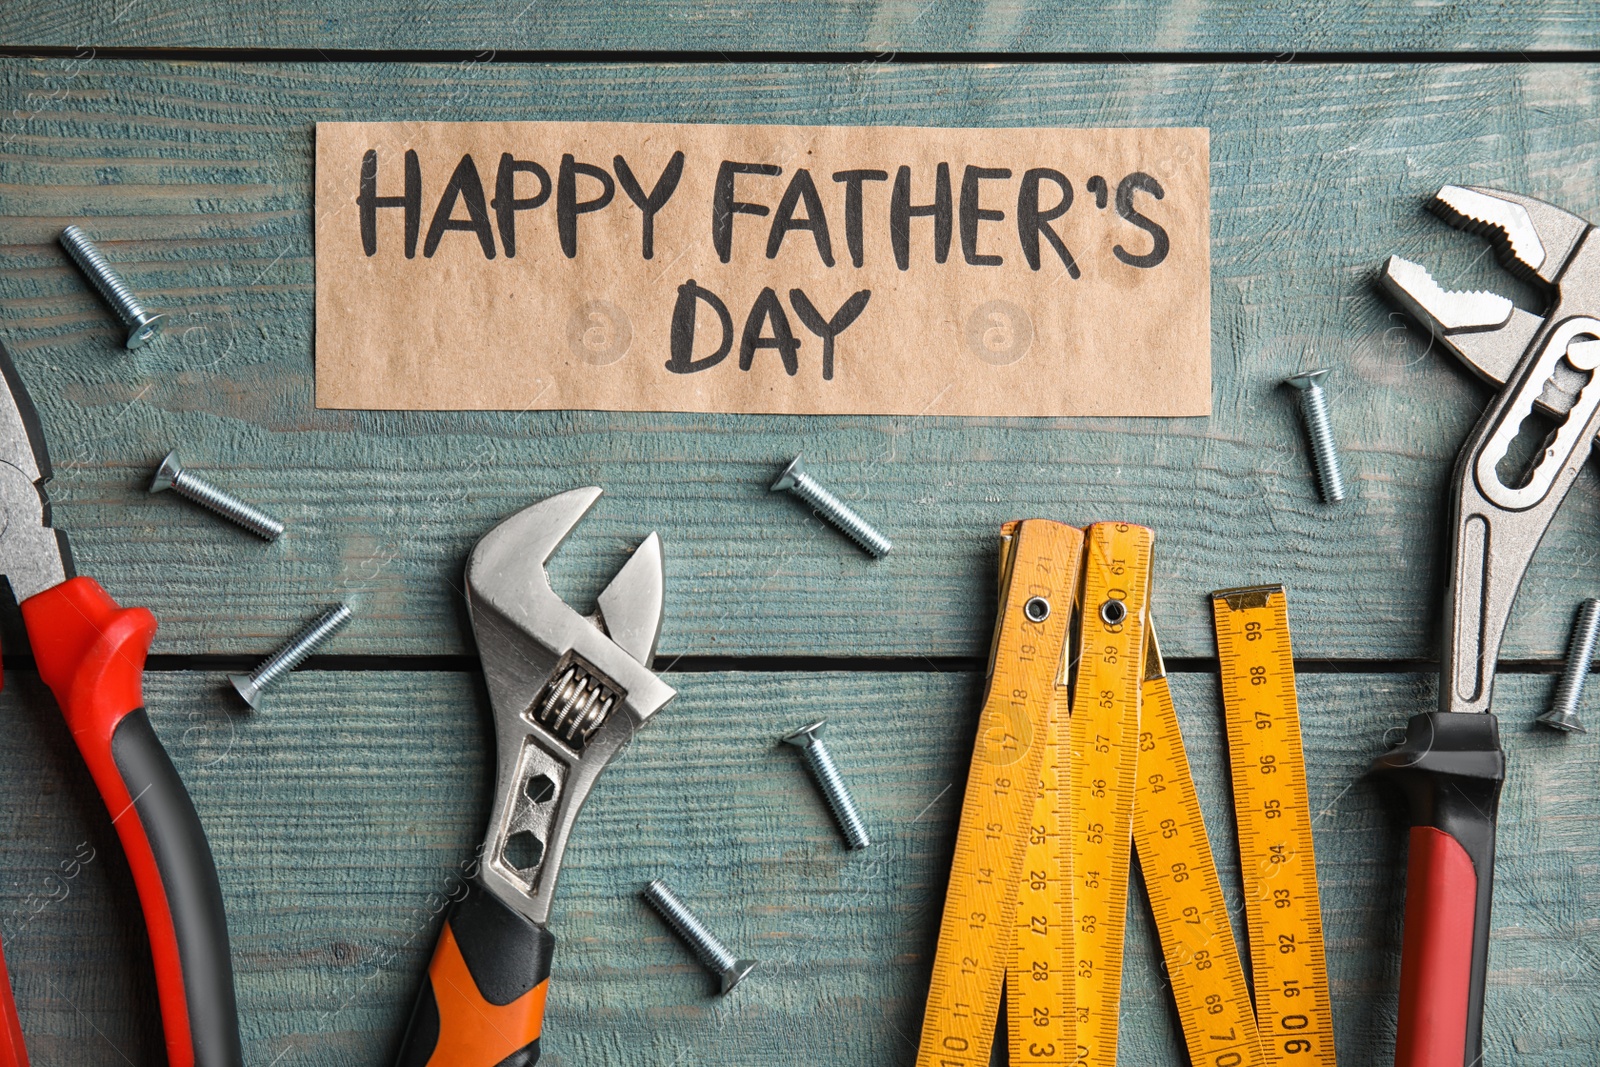 Photo of Flat lay composition with different tools on blue wooden background. Happy Father's Day